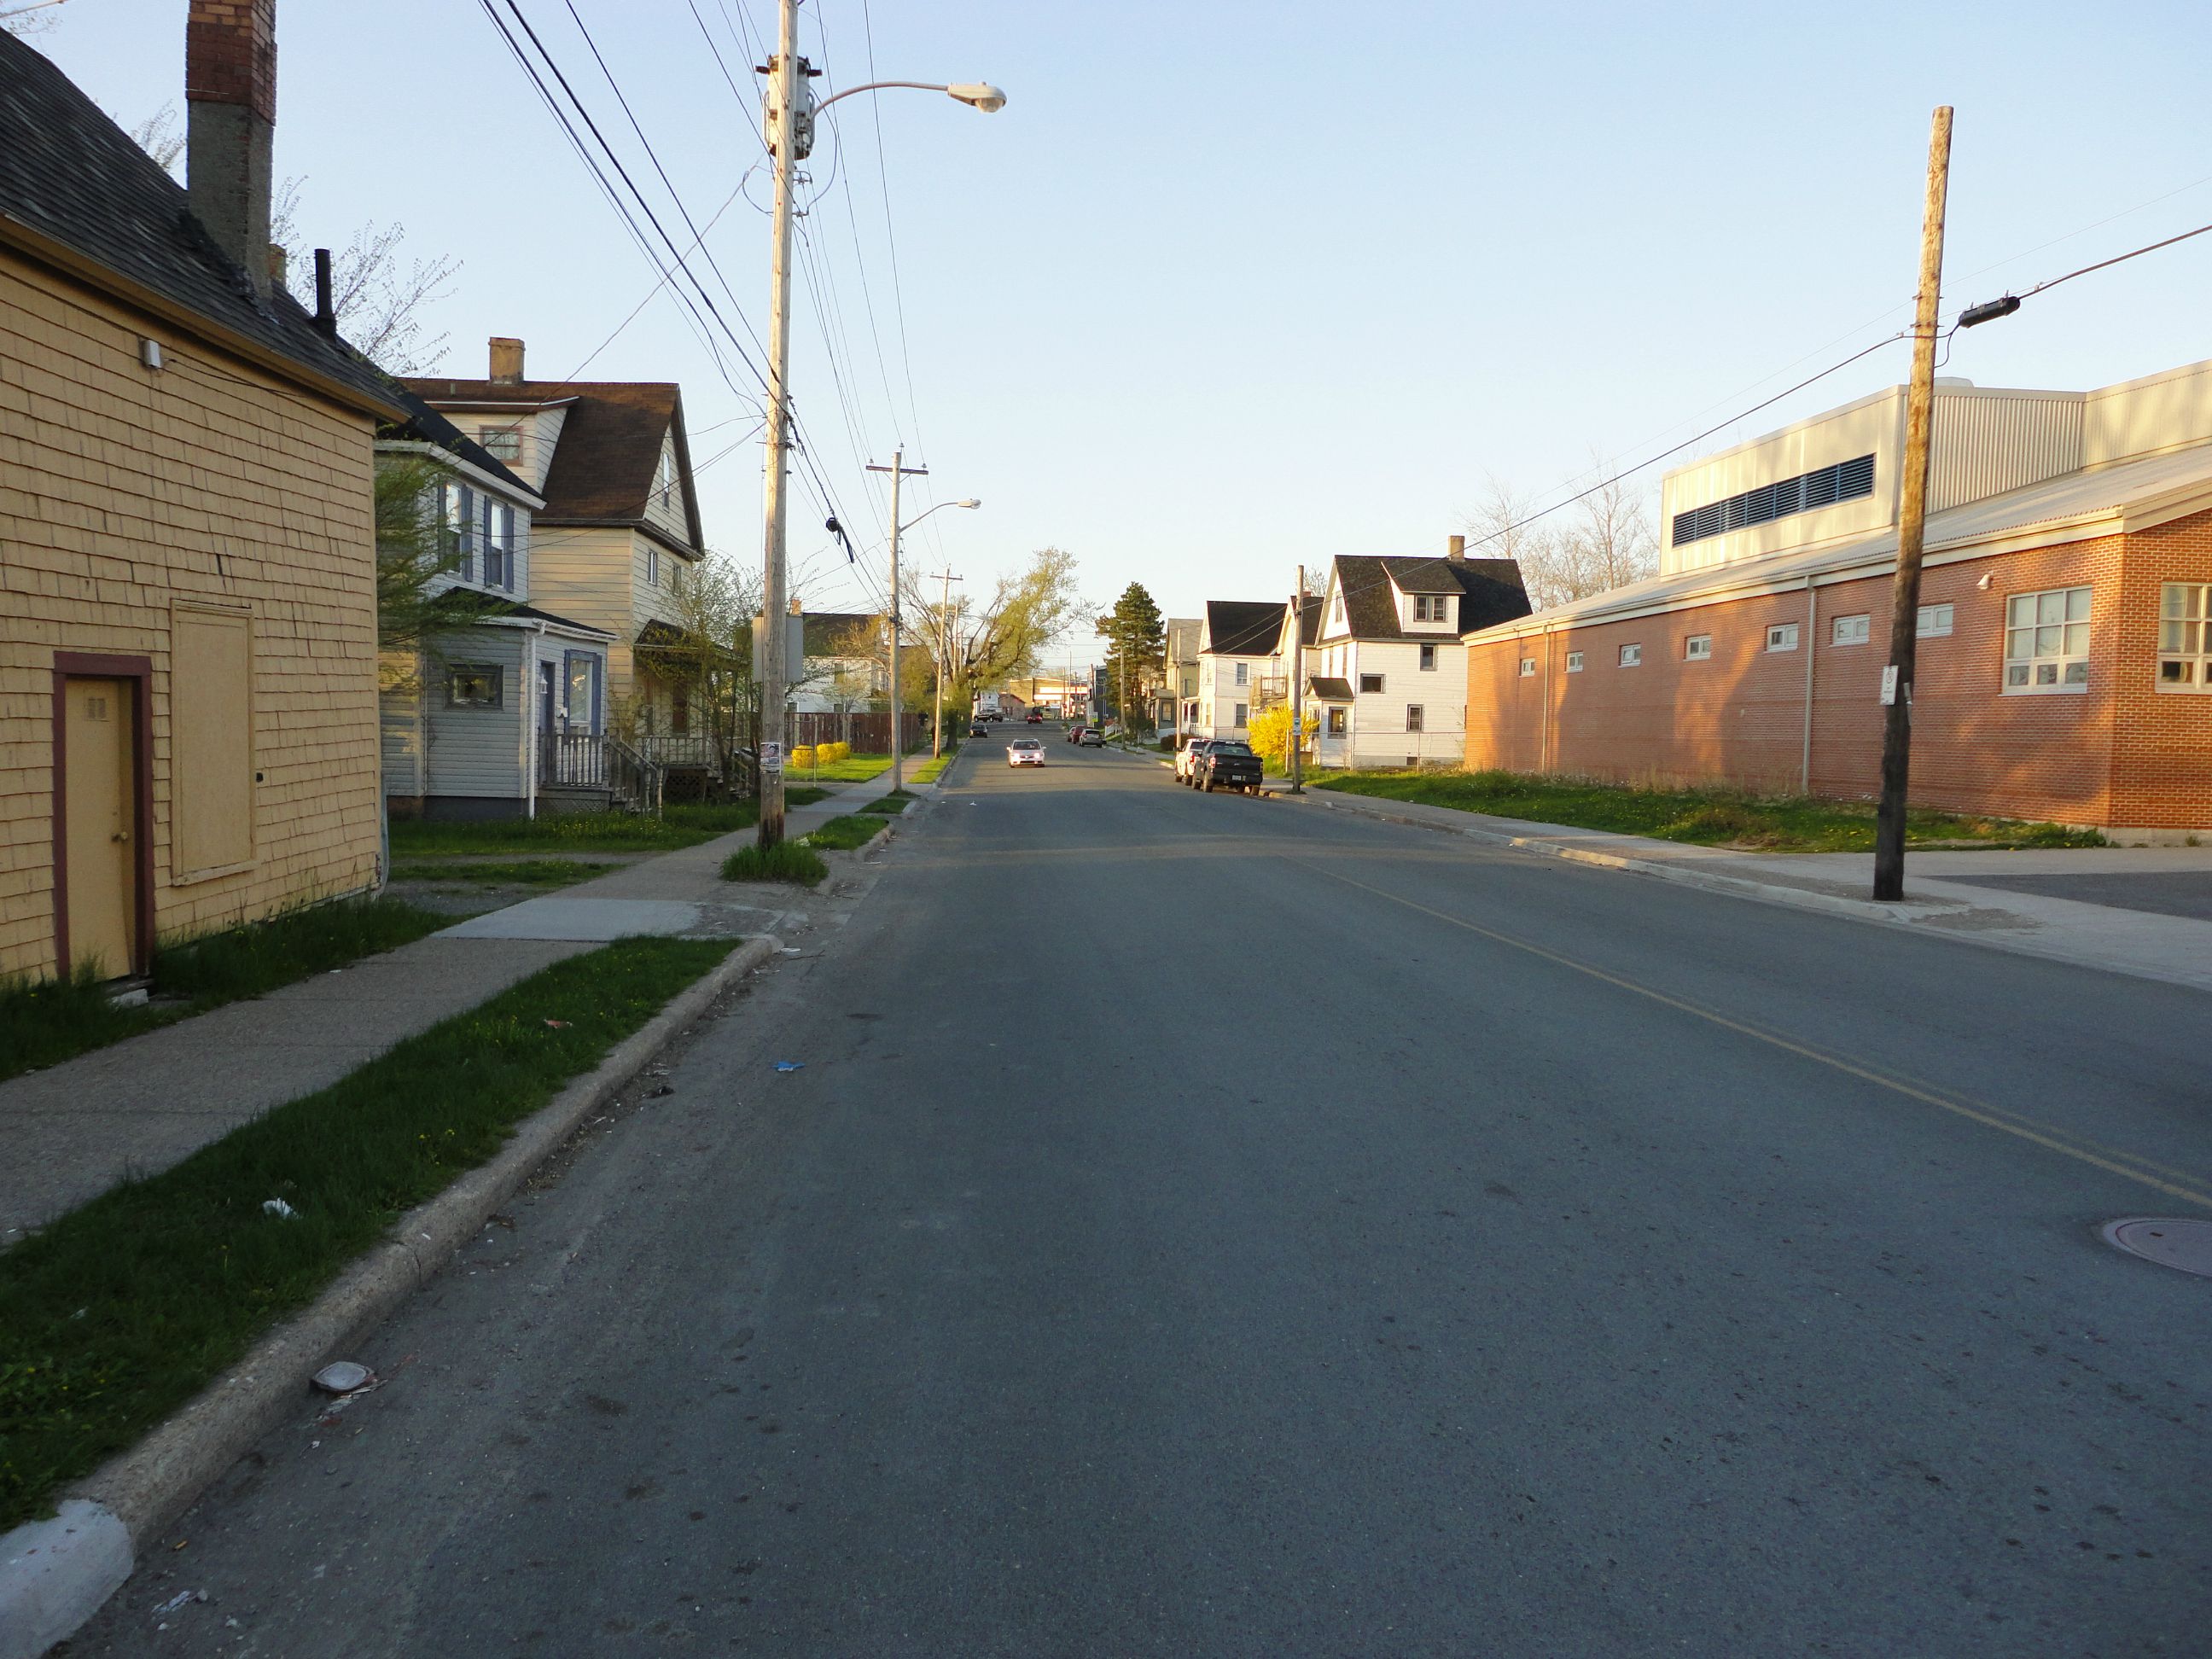 Townsend Street is one of the Very Busy Streets in Sydney Nova Scotia and heading towards Prince Street and Sheriff Avenue.